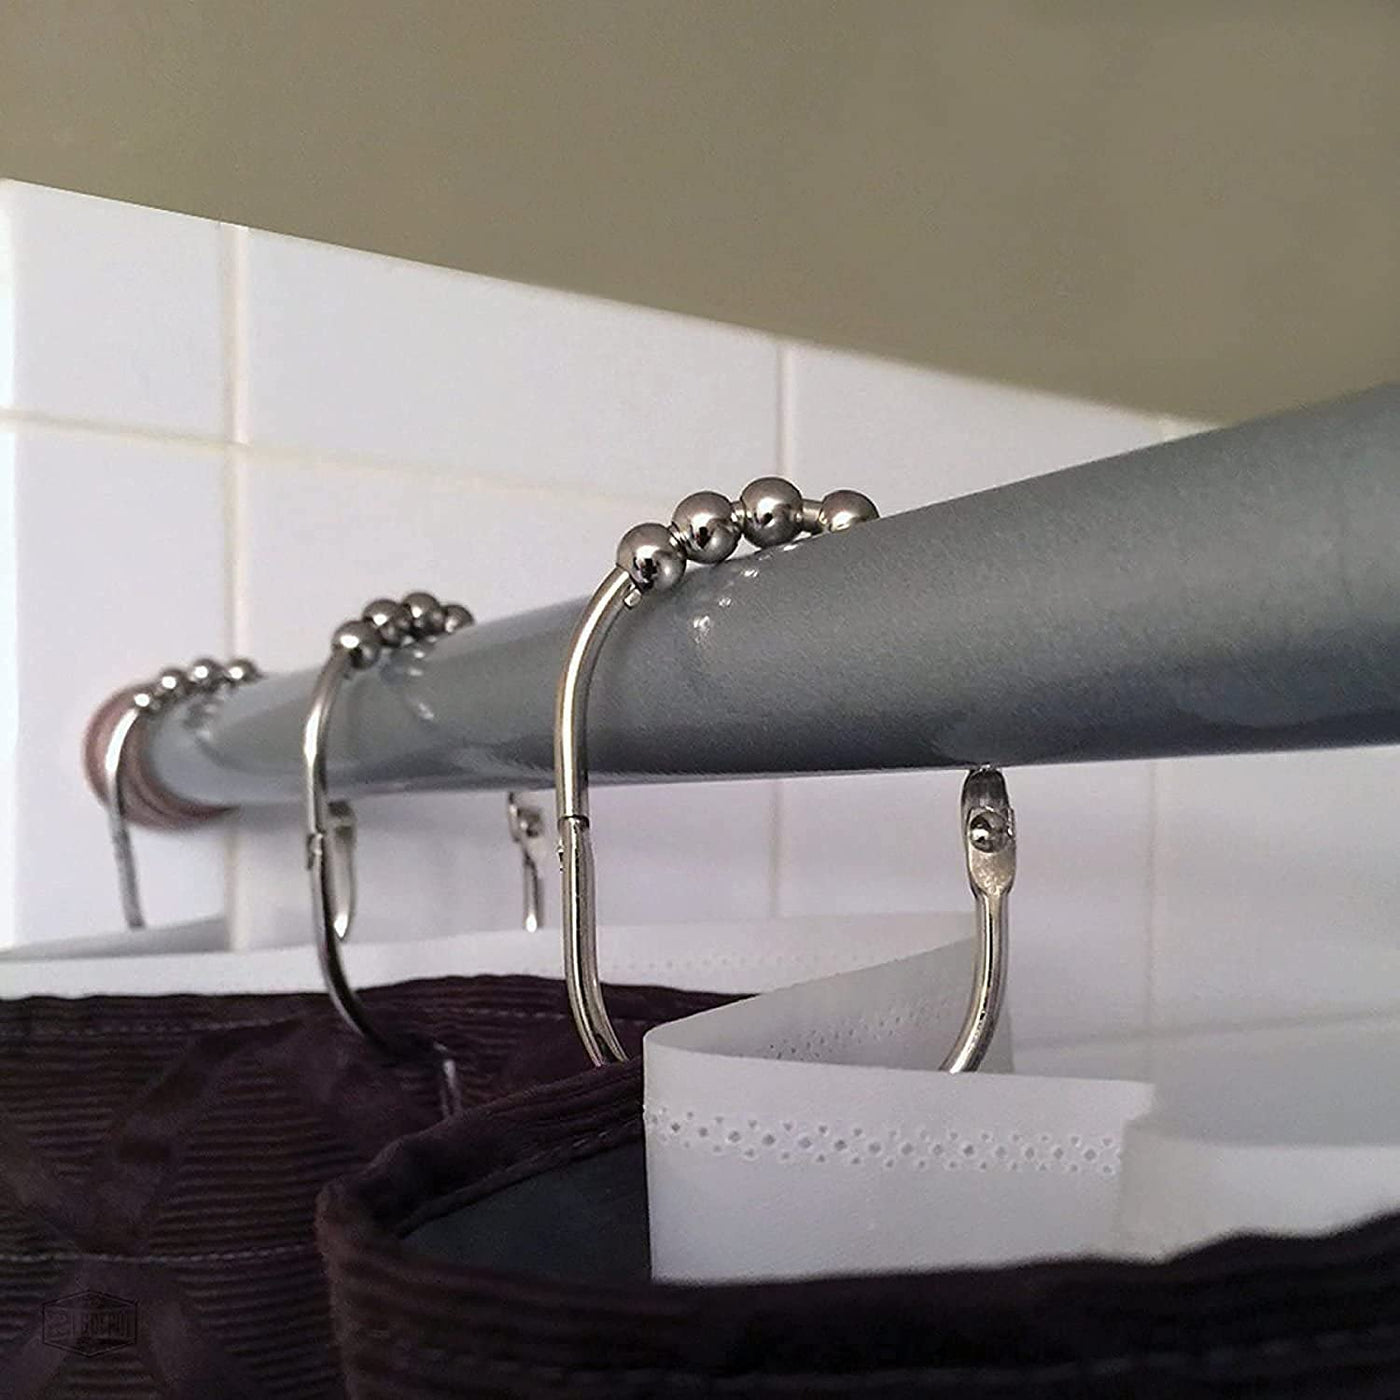 Chrome Shower Curtain Rings - Easy Glide, Decorative